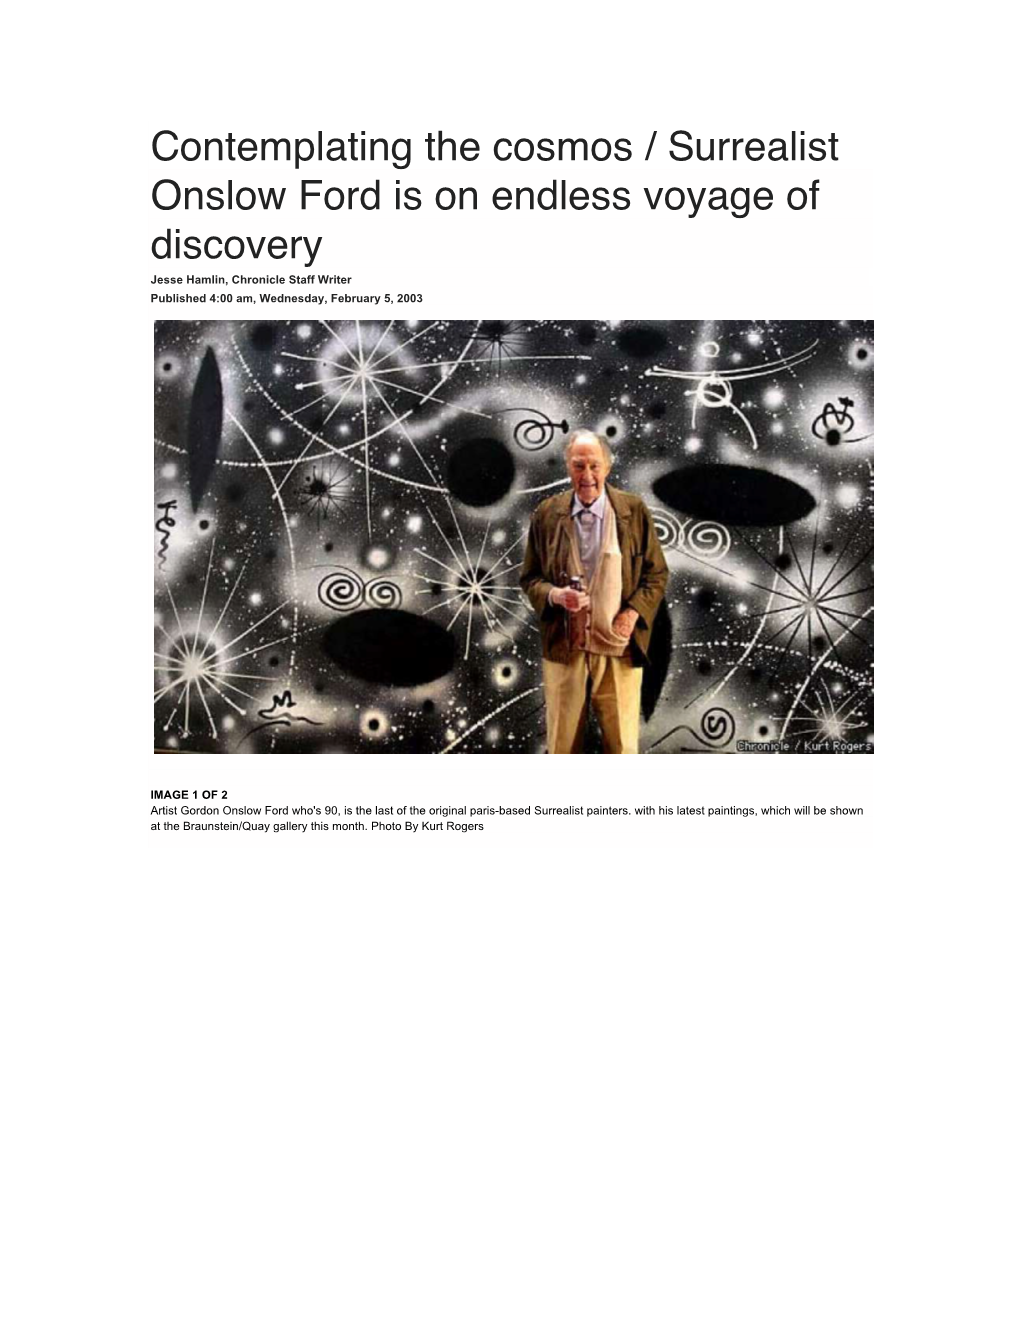 Contemplating the Cosmos / Surrealist Onslow Ford Is on Endless Voyage